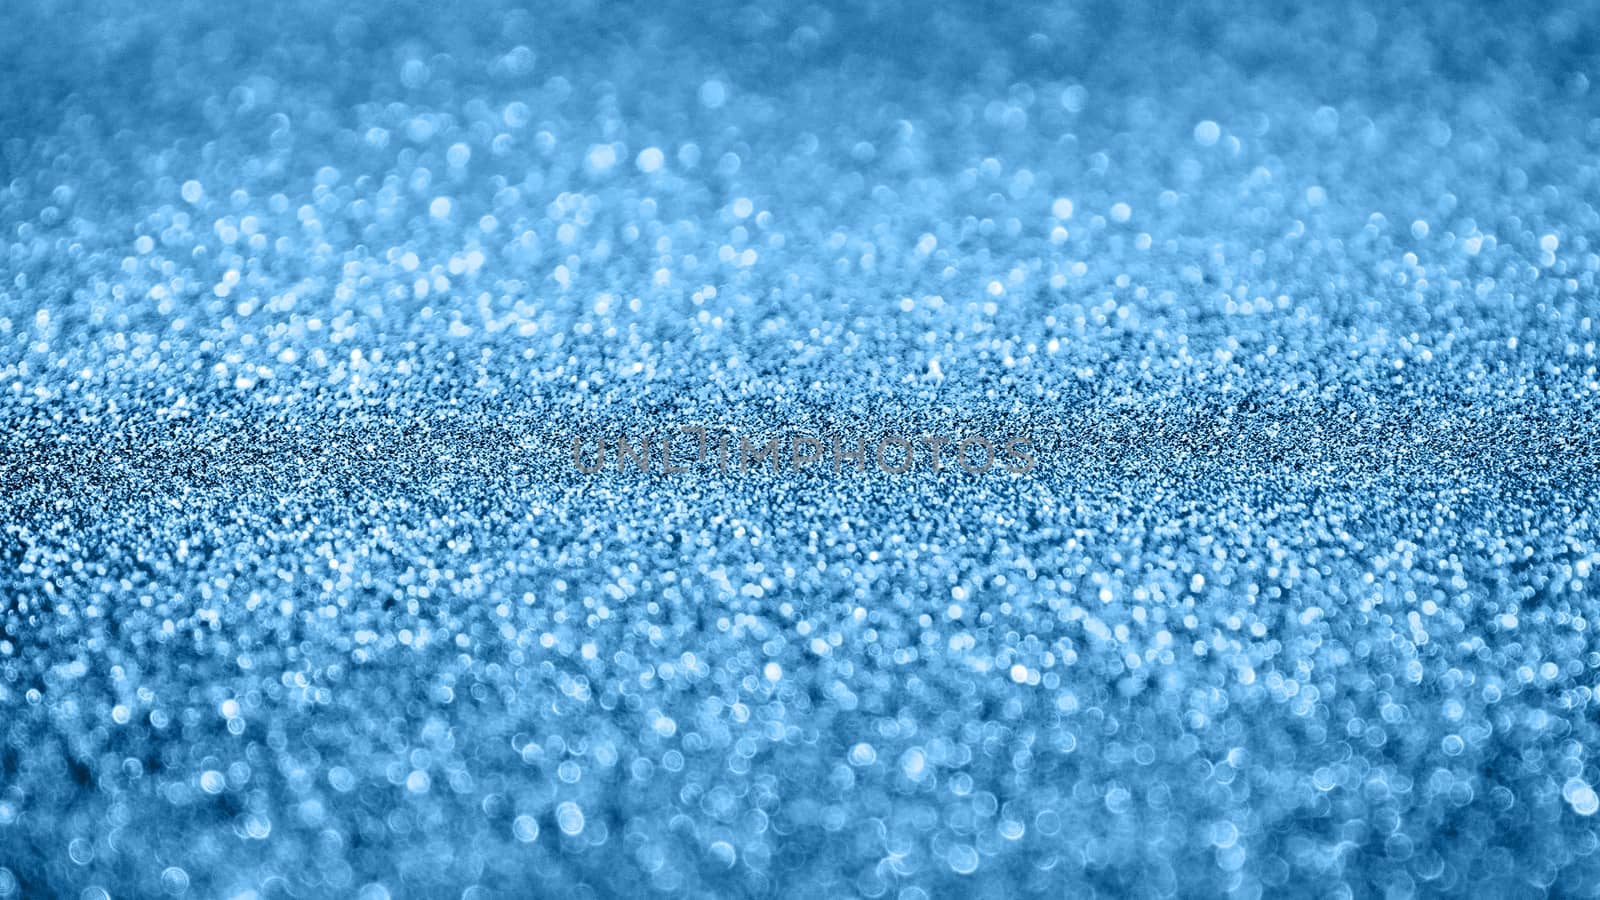 Classic blue abstract background with shiny glitter. Blue festiv by aksenovko